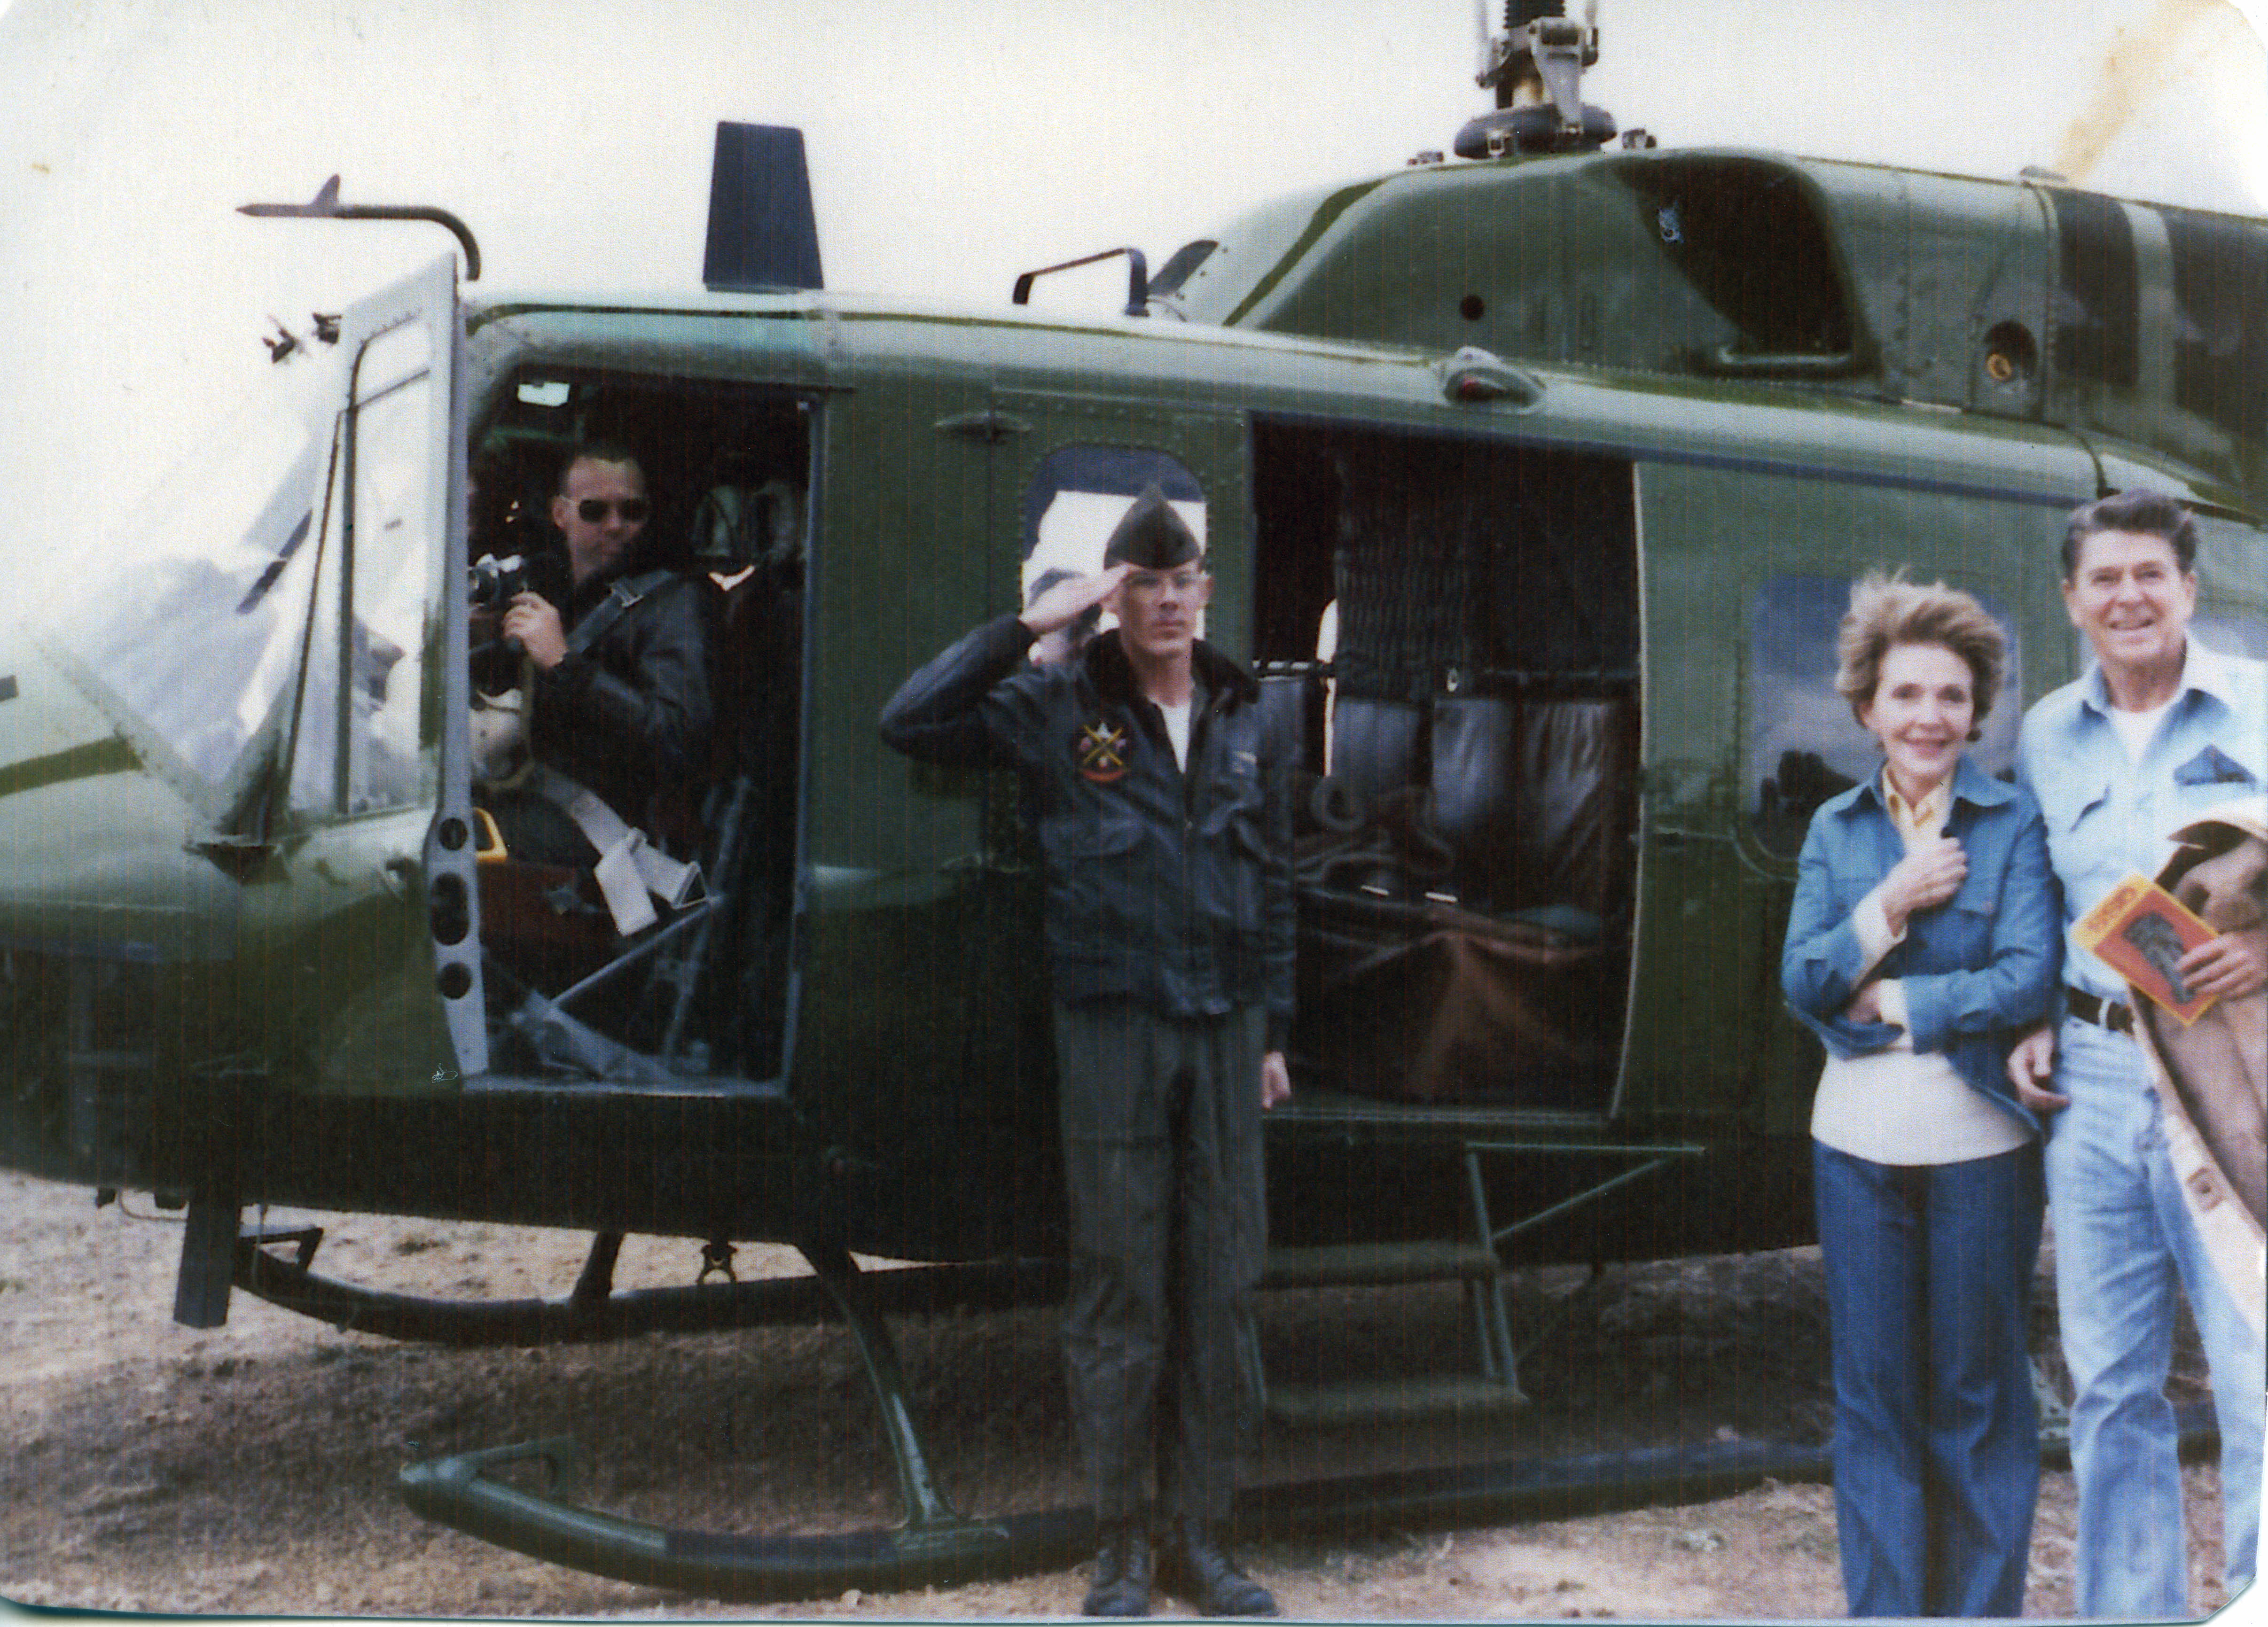 The Reagans posing with Michael Davis at Rancho Del Cielo helicopter landing site